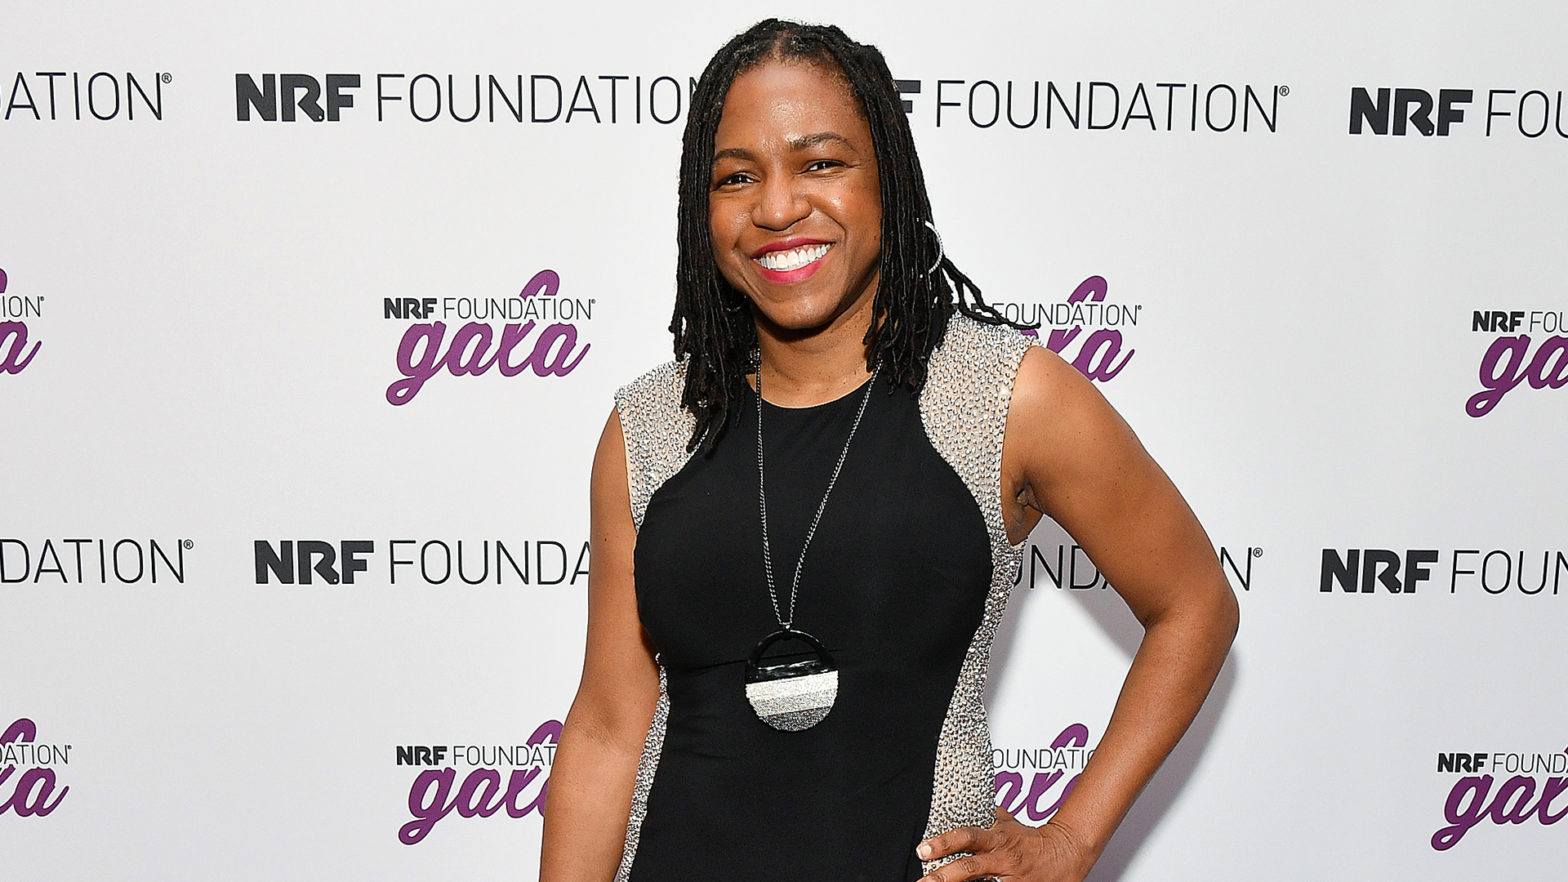 StockX Taps Former TaskRabbit CEO Stacy Brown-Philpot As First Female Board Member